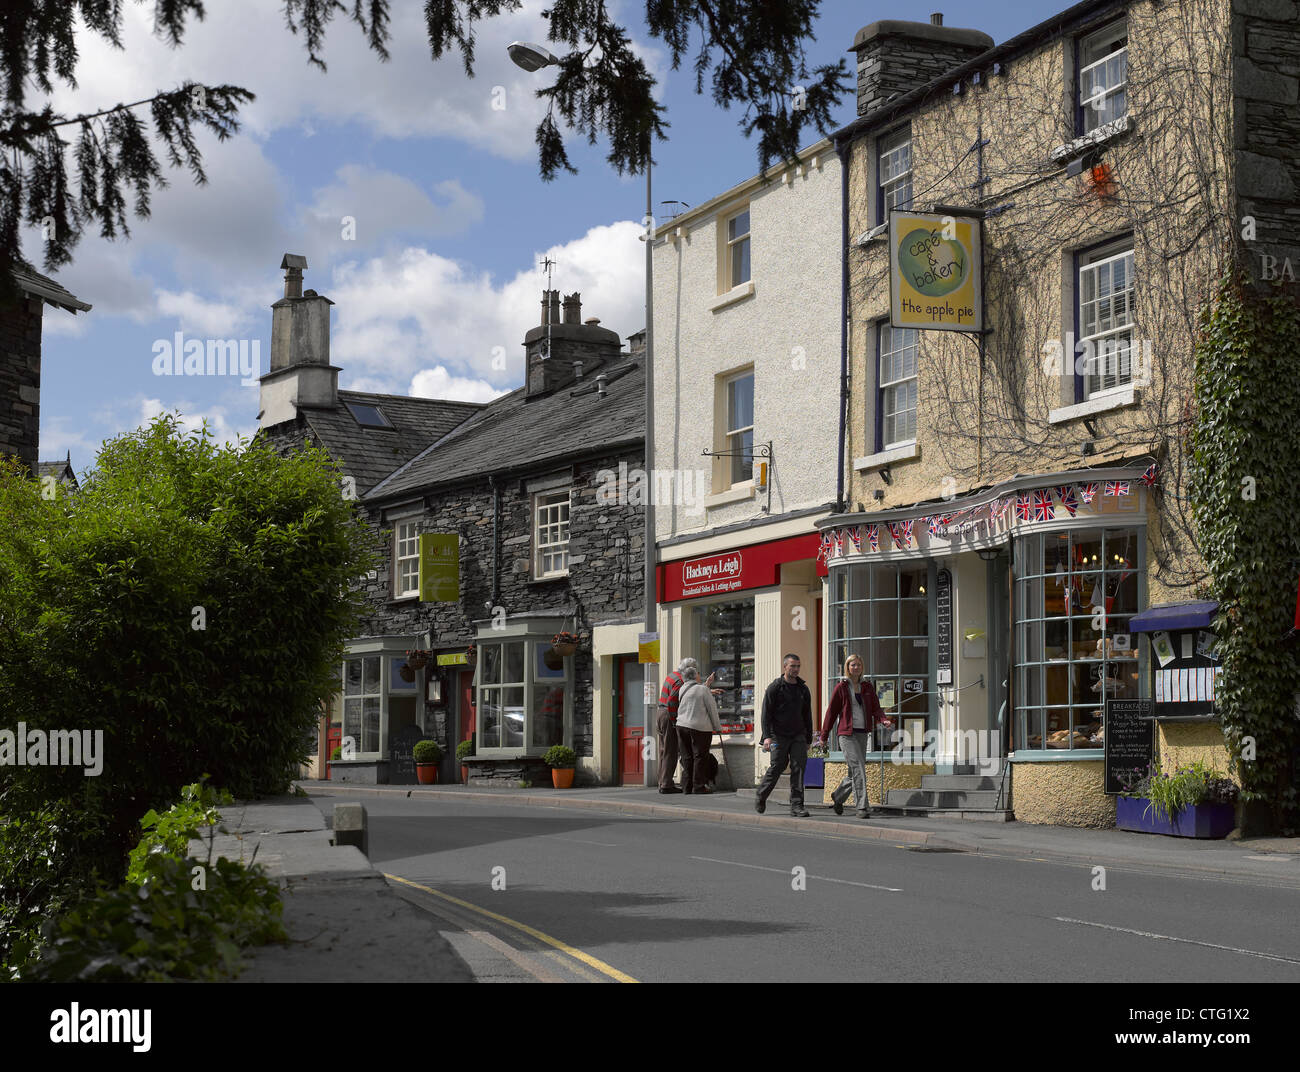 Bakery and shops stores in the town centre in summer Rydal Road Ambleside Cumbria England UK United Kingdom GB Great Britain Stock Photo